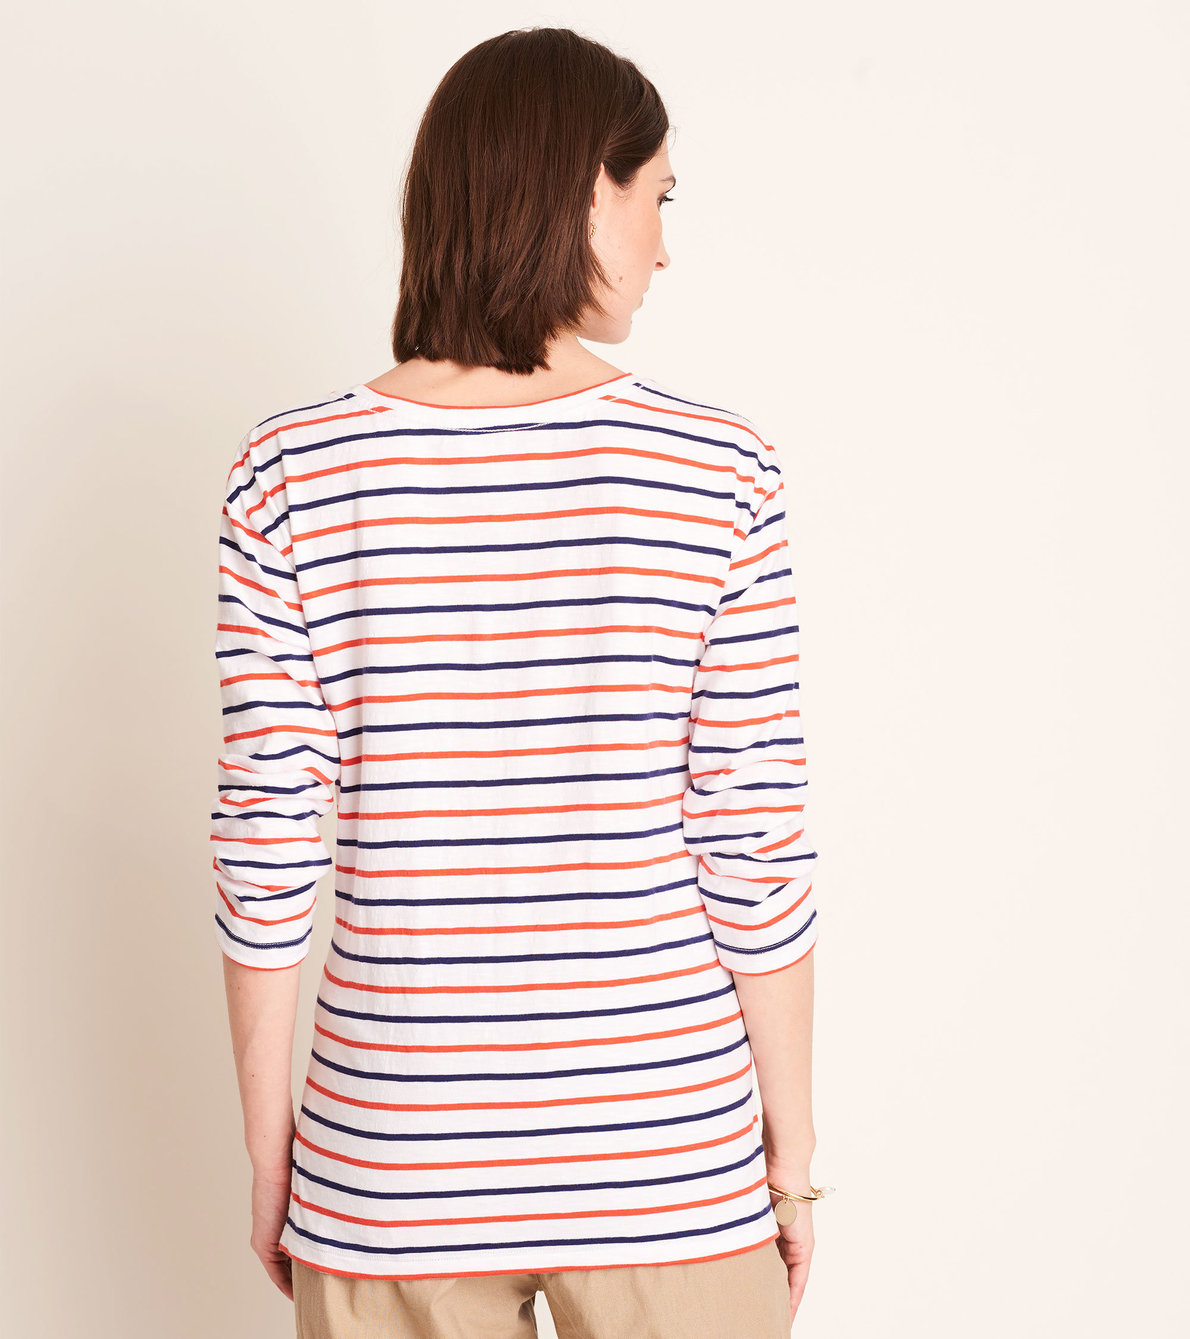 View larger image of Hatley 3/4 Sleeve Tee - Red and Blue Stripes